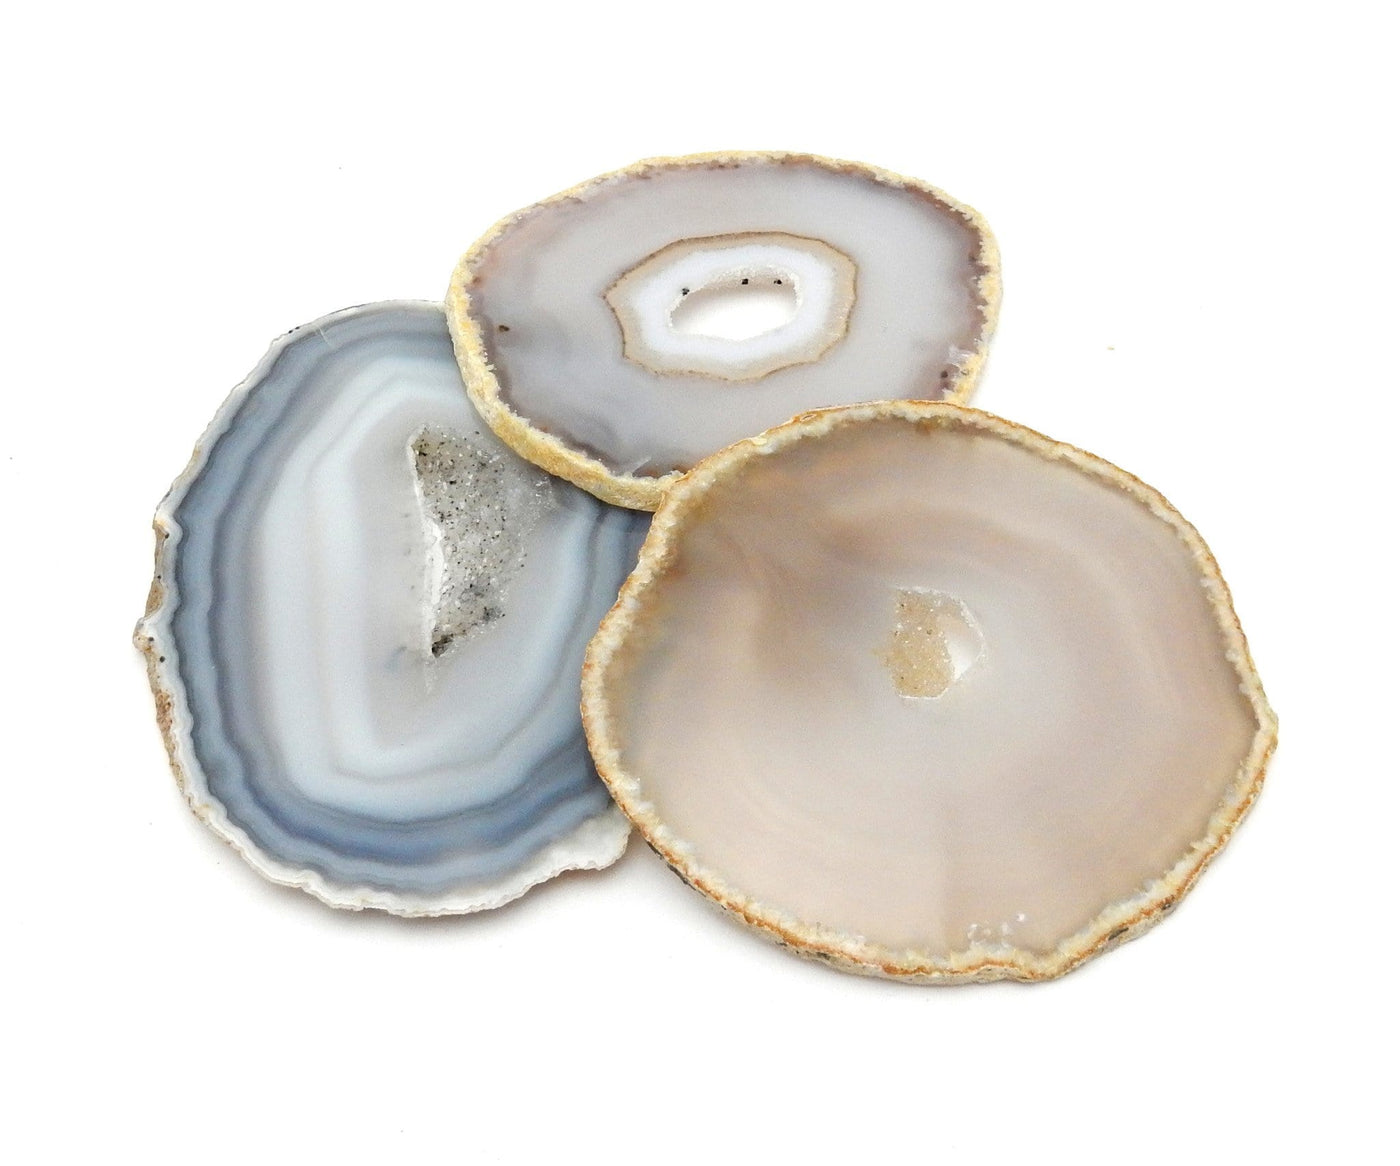 Natural Agate Slice - Agate Slices #5  - 3 in a pile